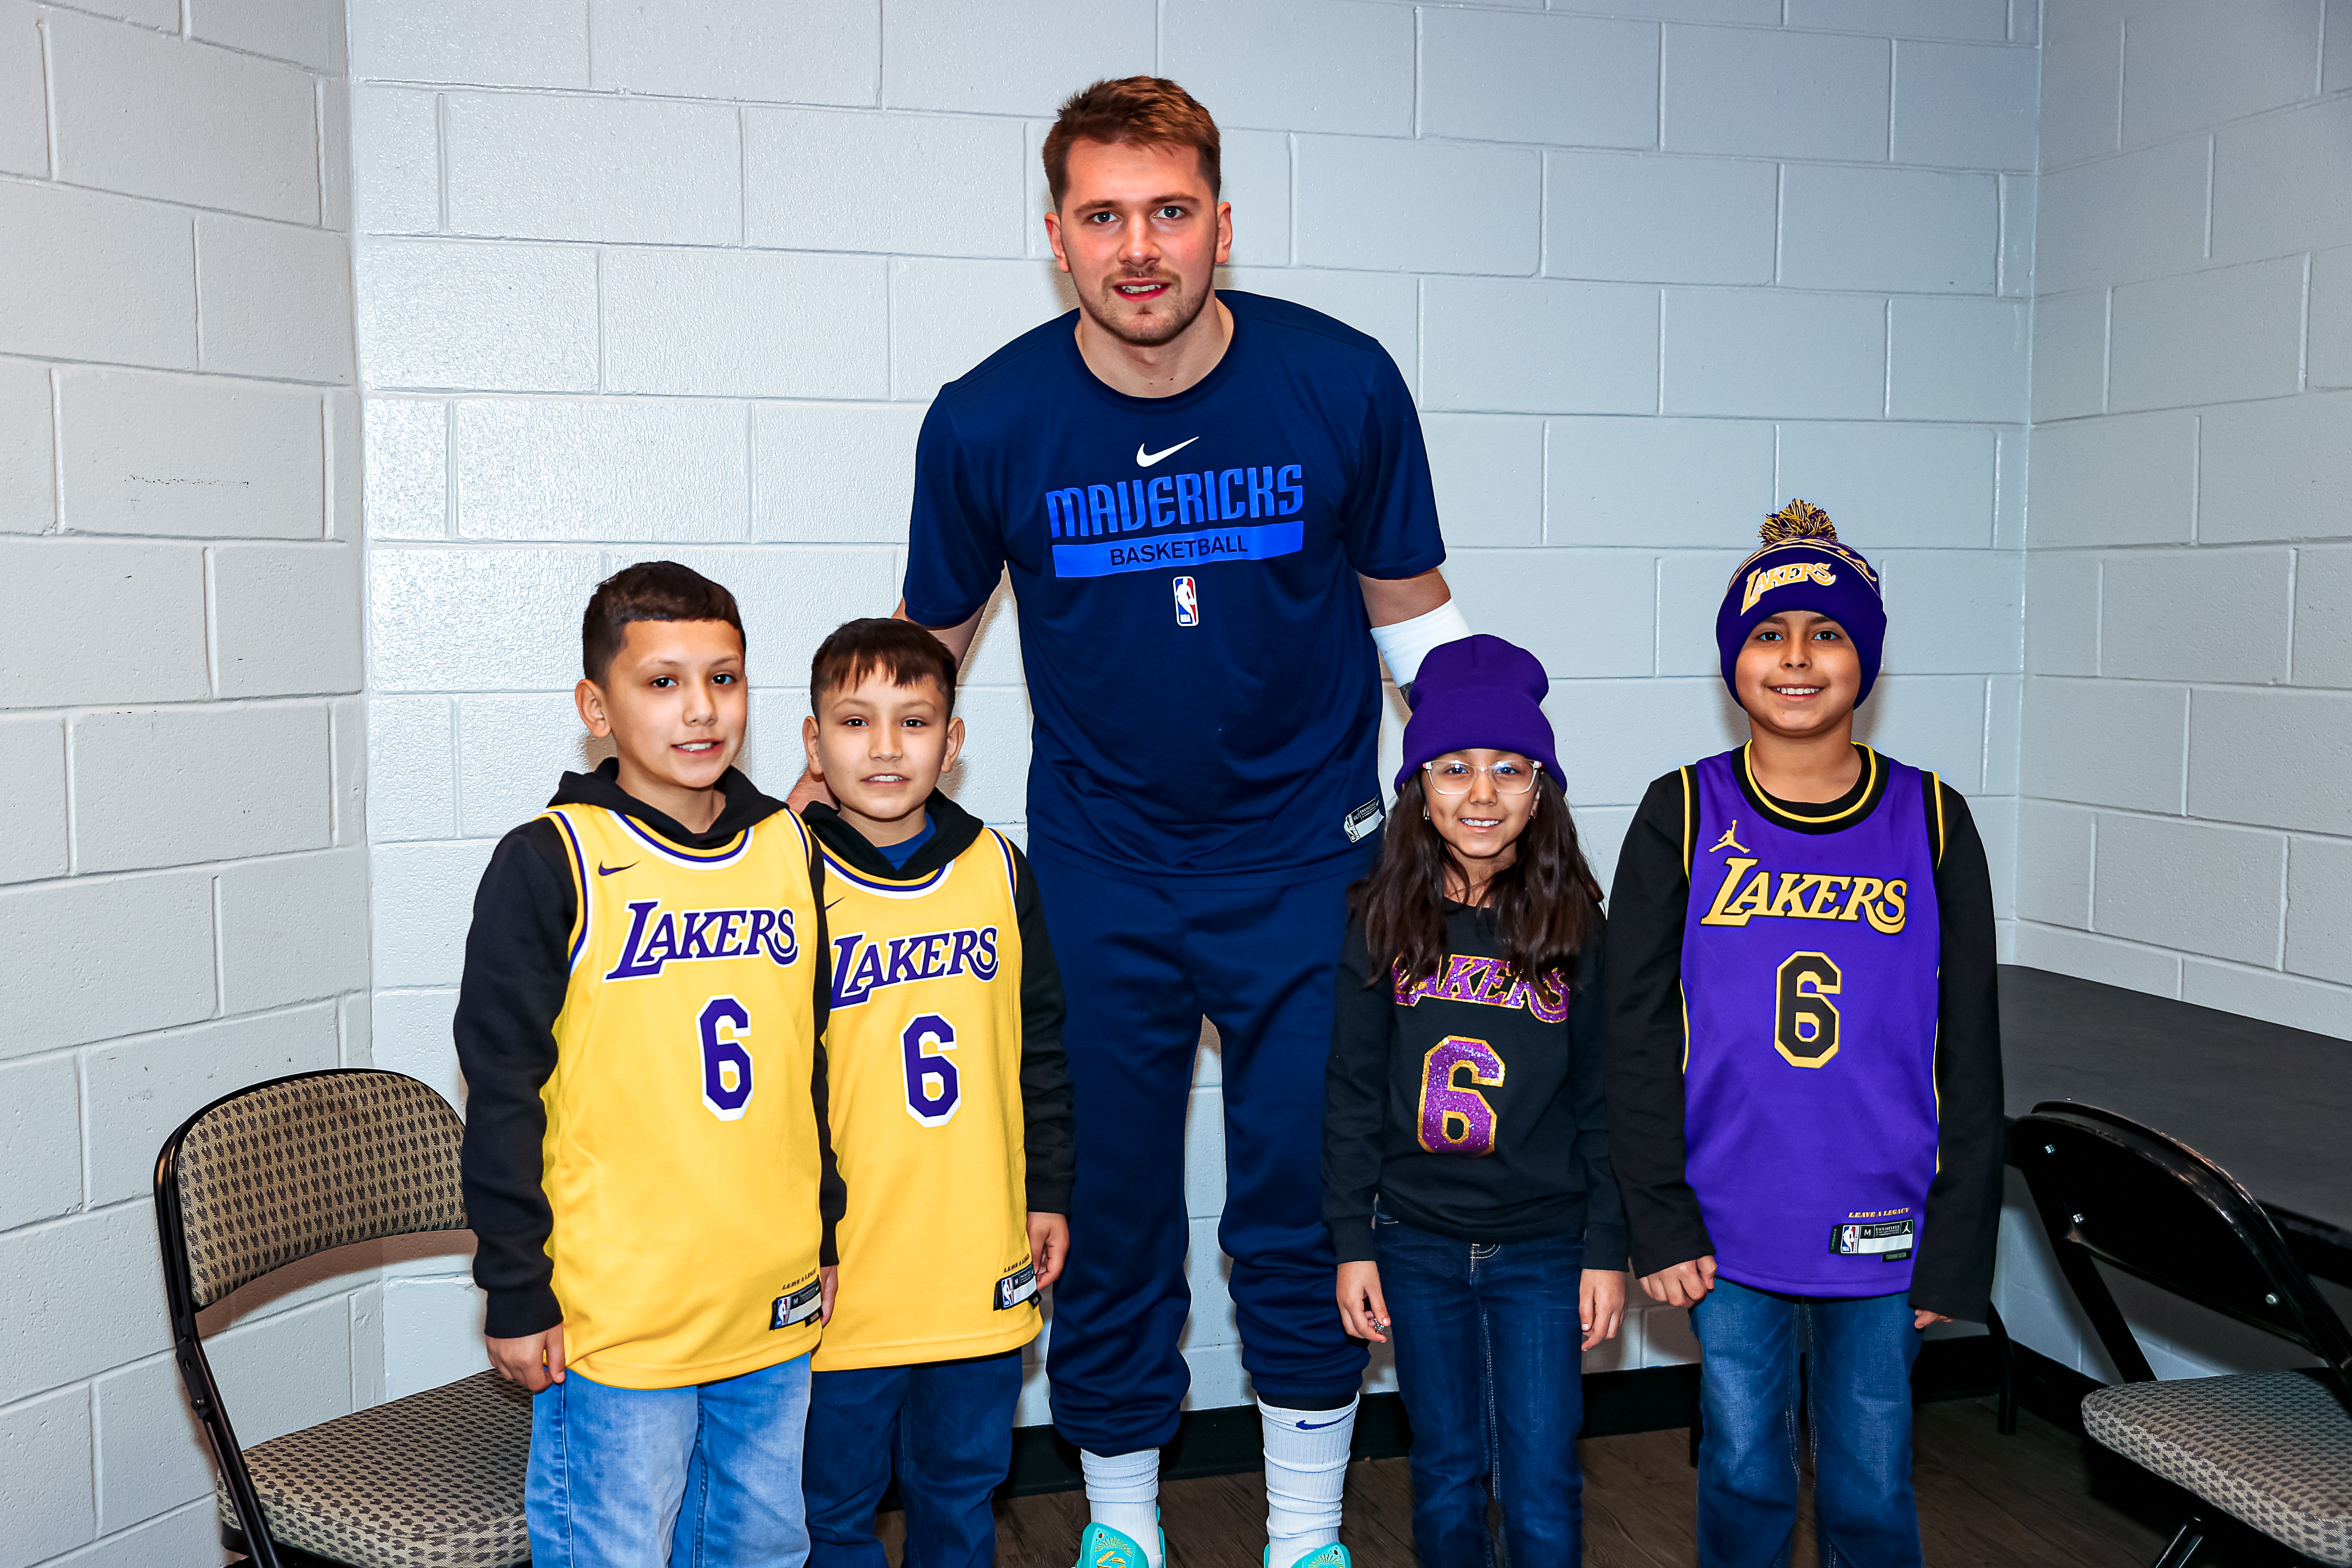 Luka Doncic provides hope for children at games, in the community